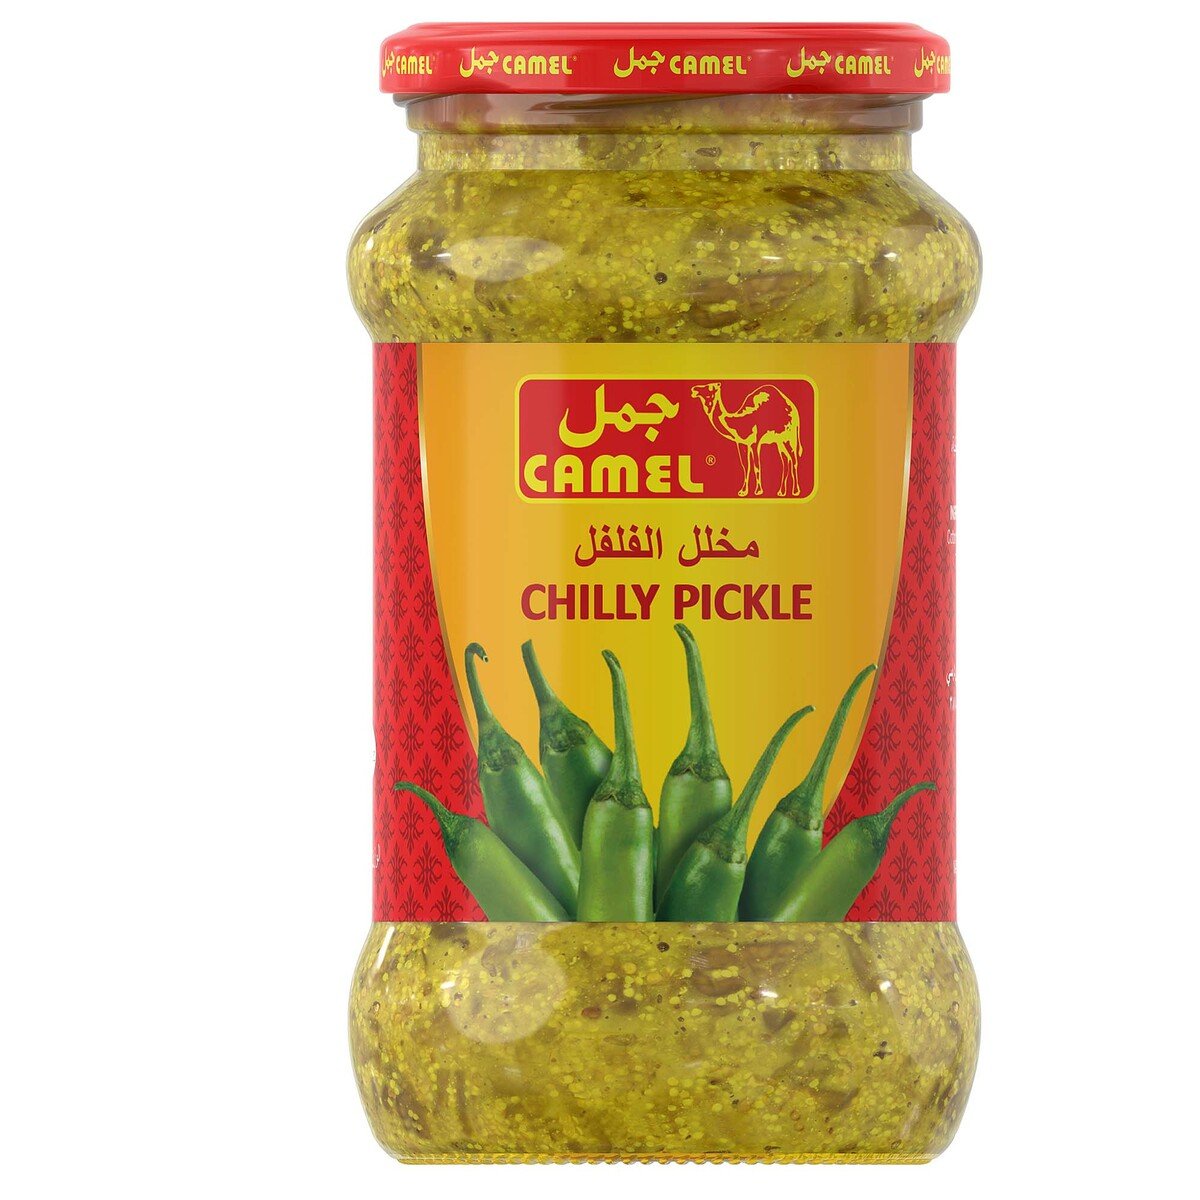 Camel Chilly Pickle 380g